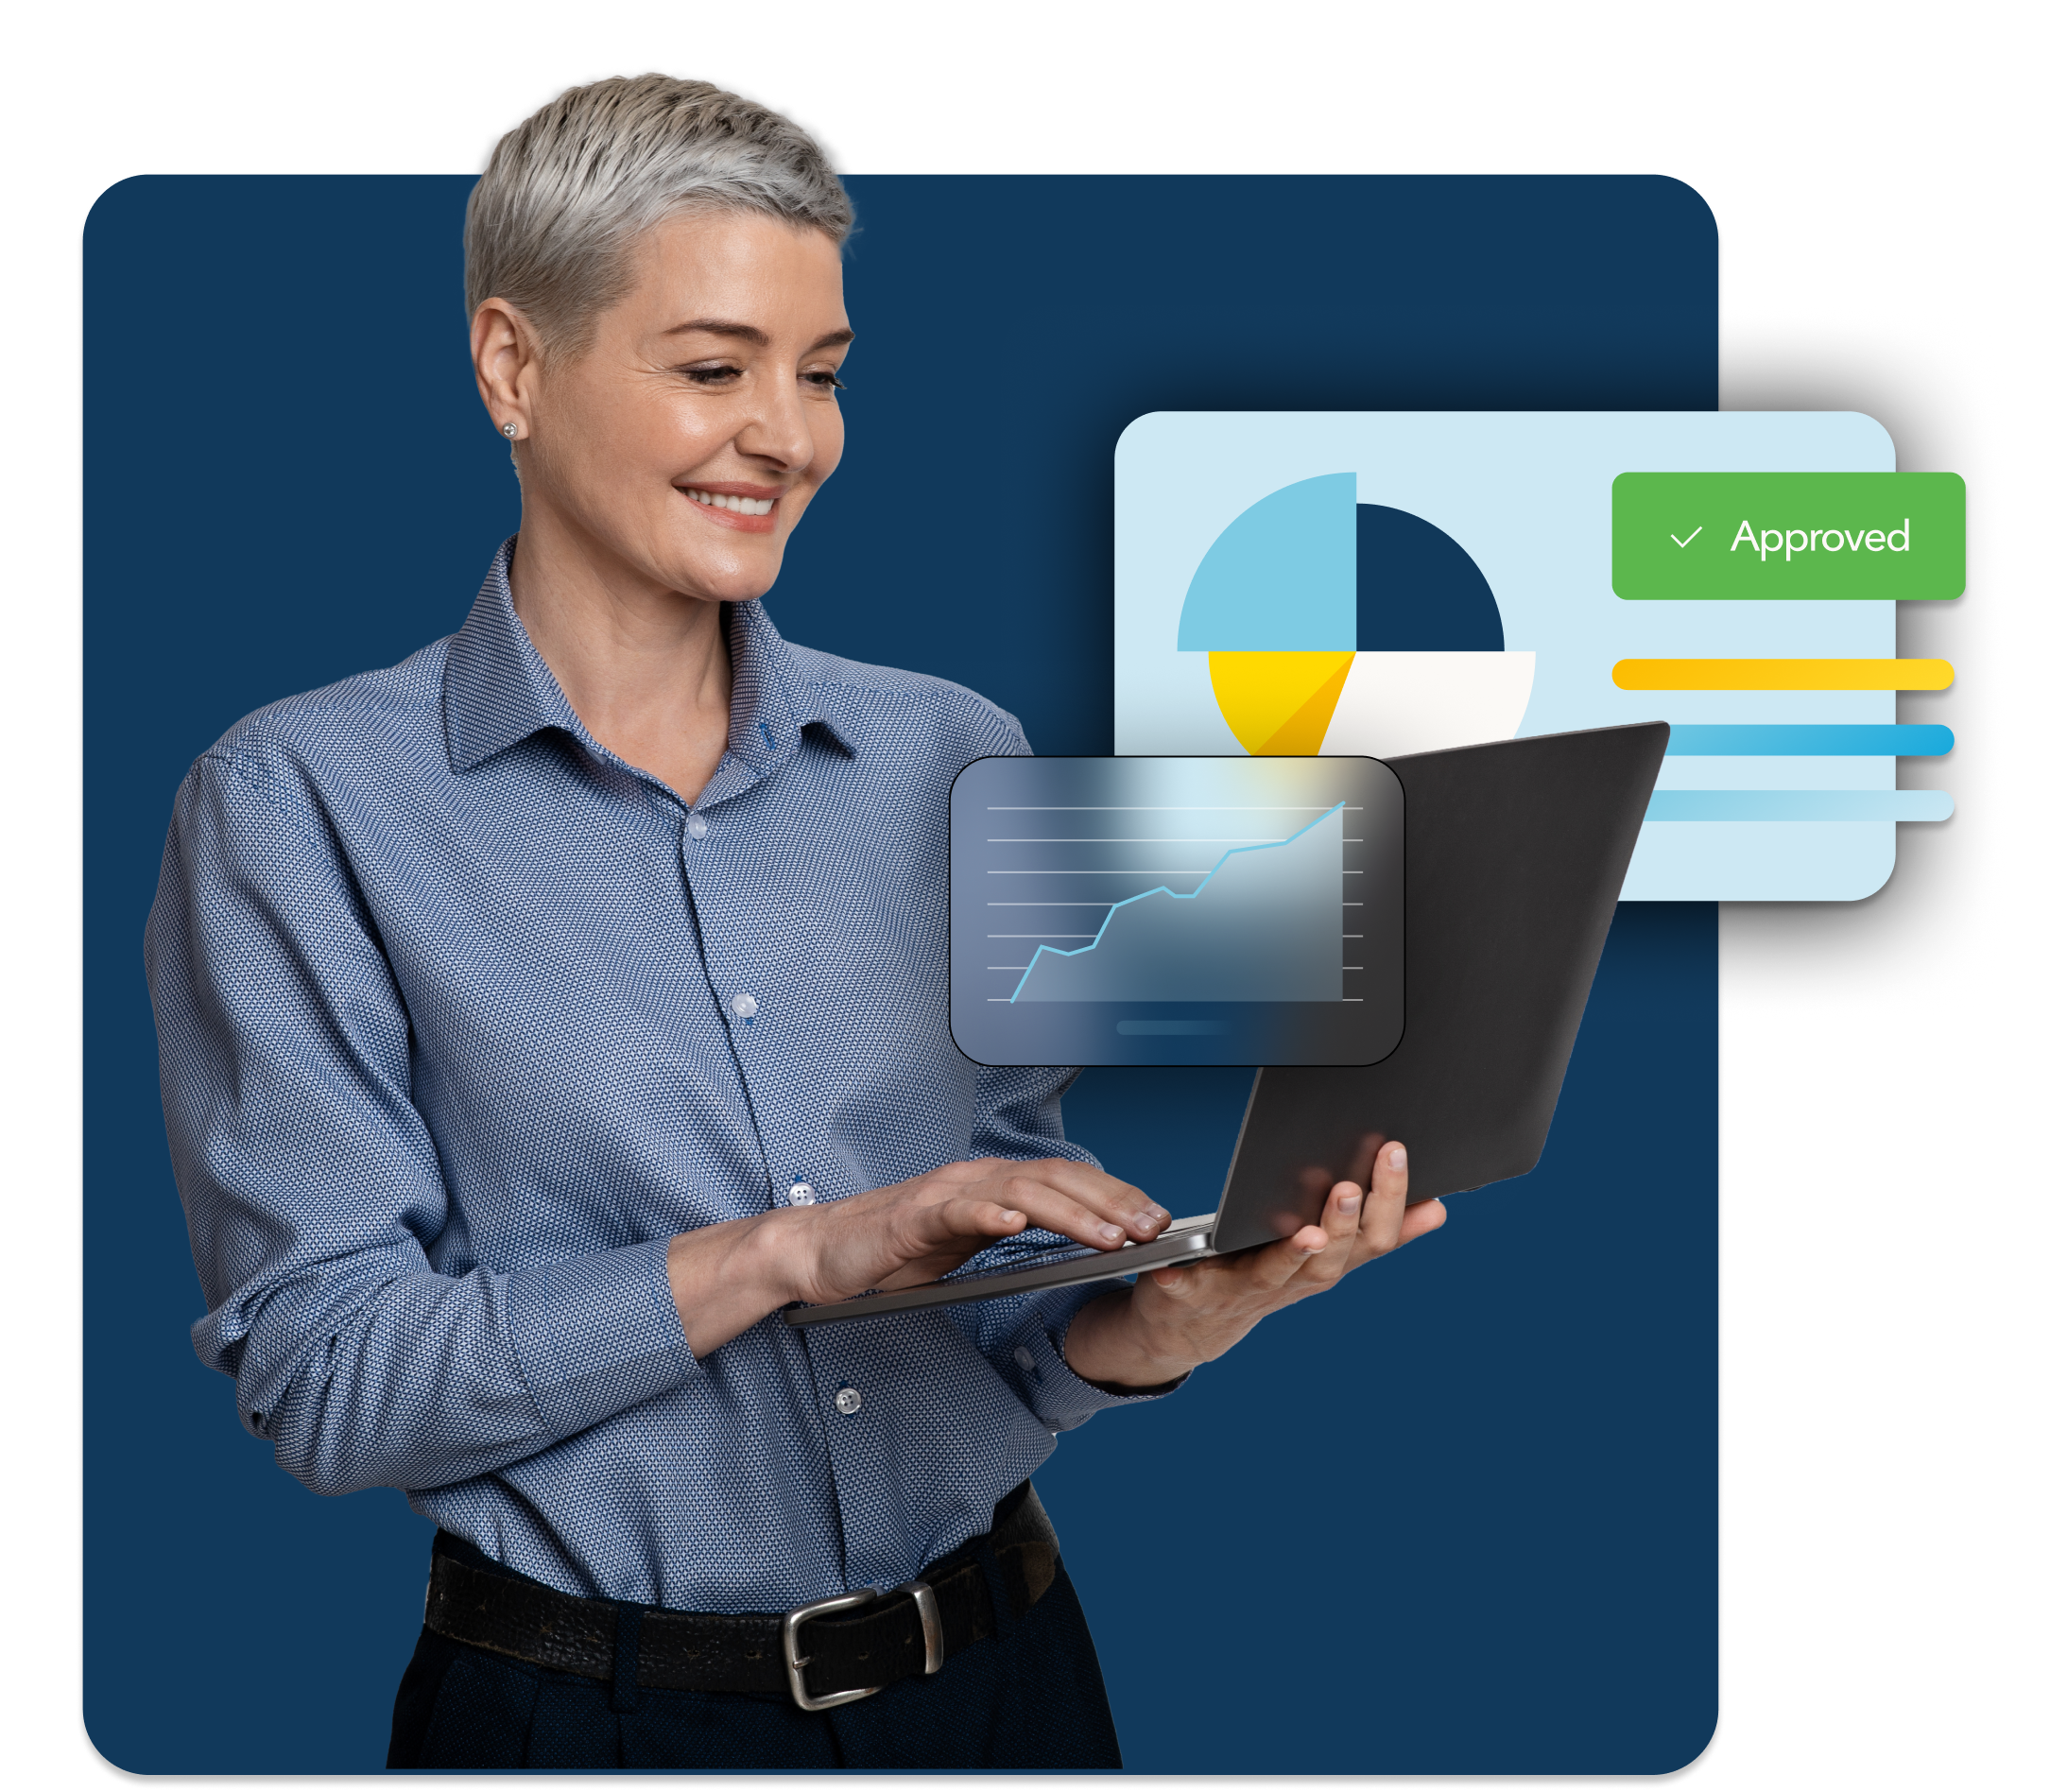 A woman smiles at a laptop while using banking software. An abstracted graph floats behind her.